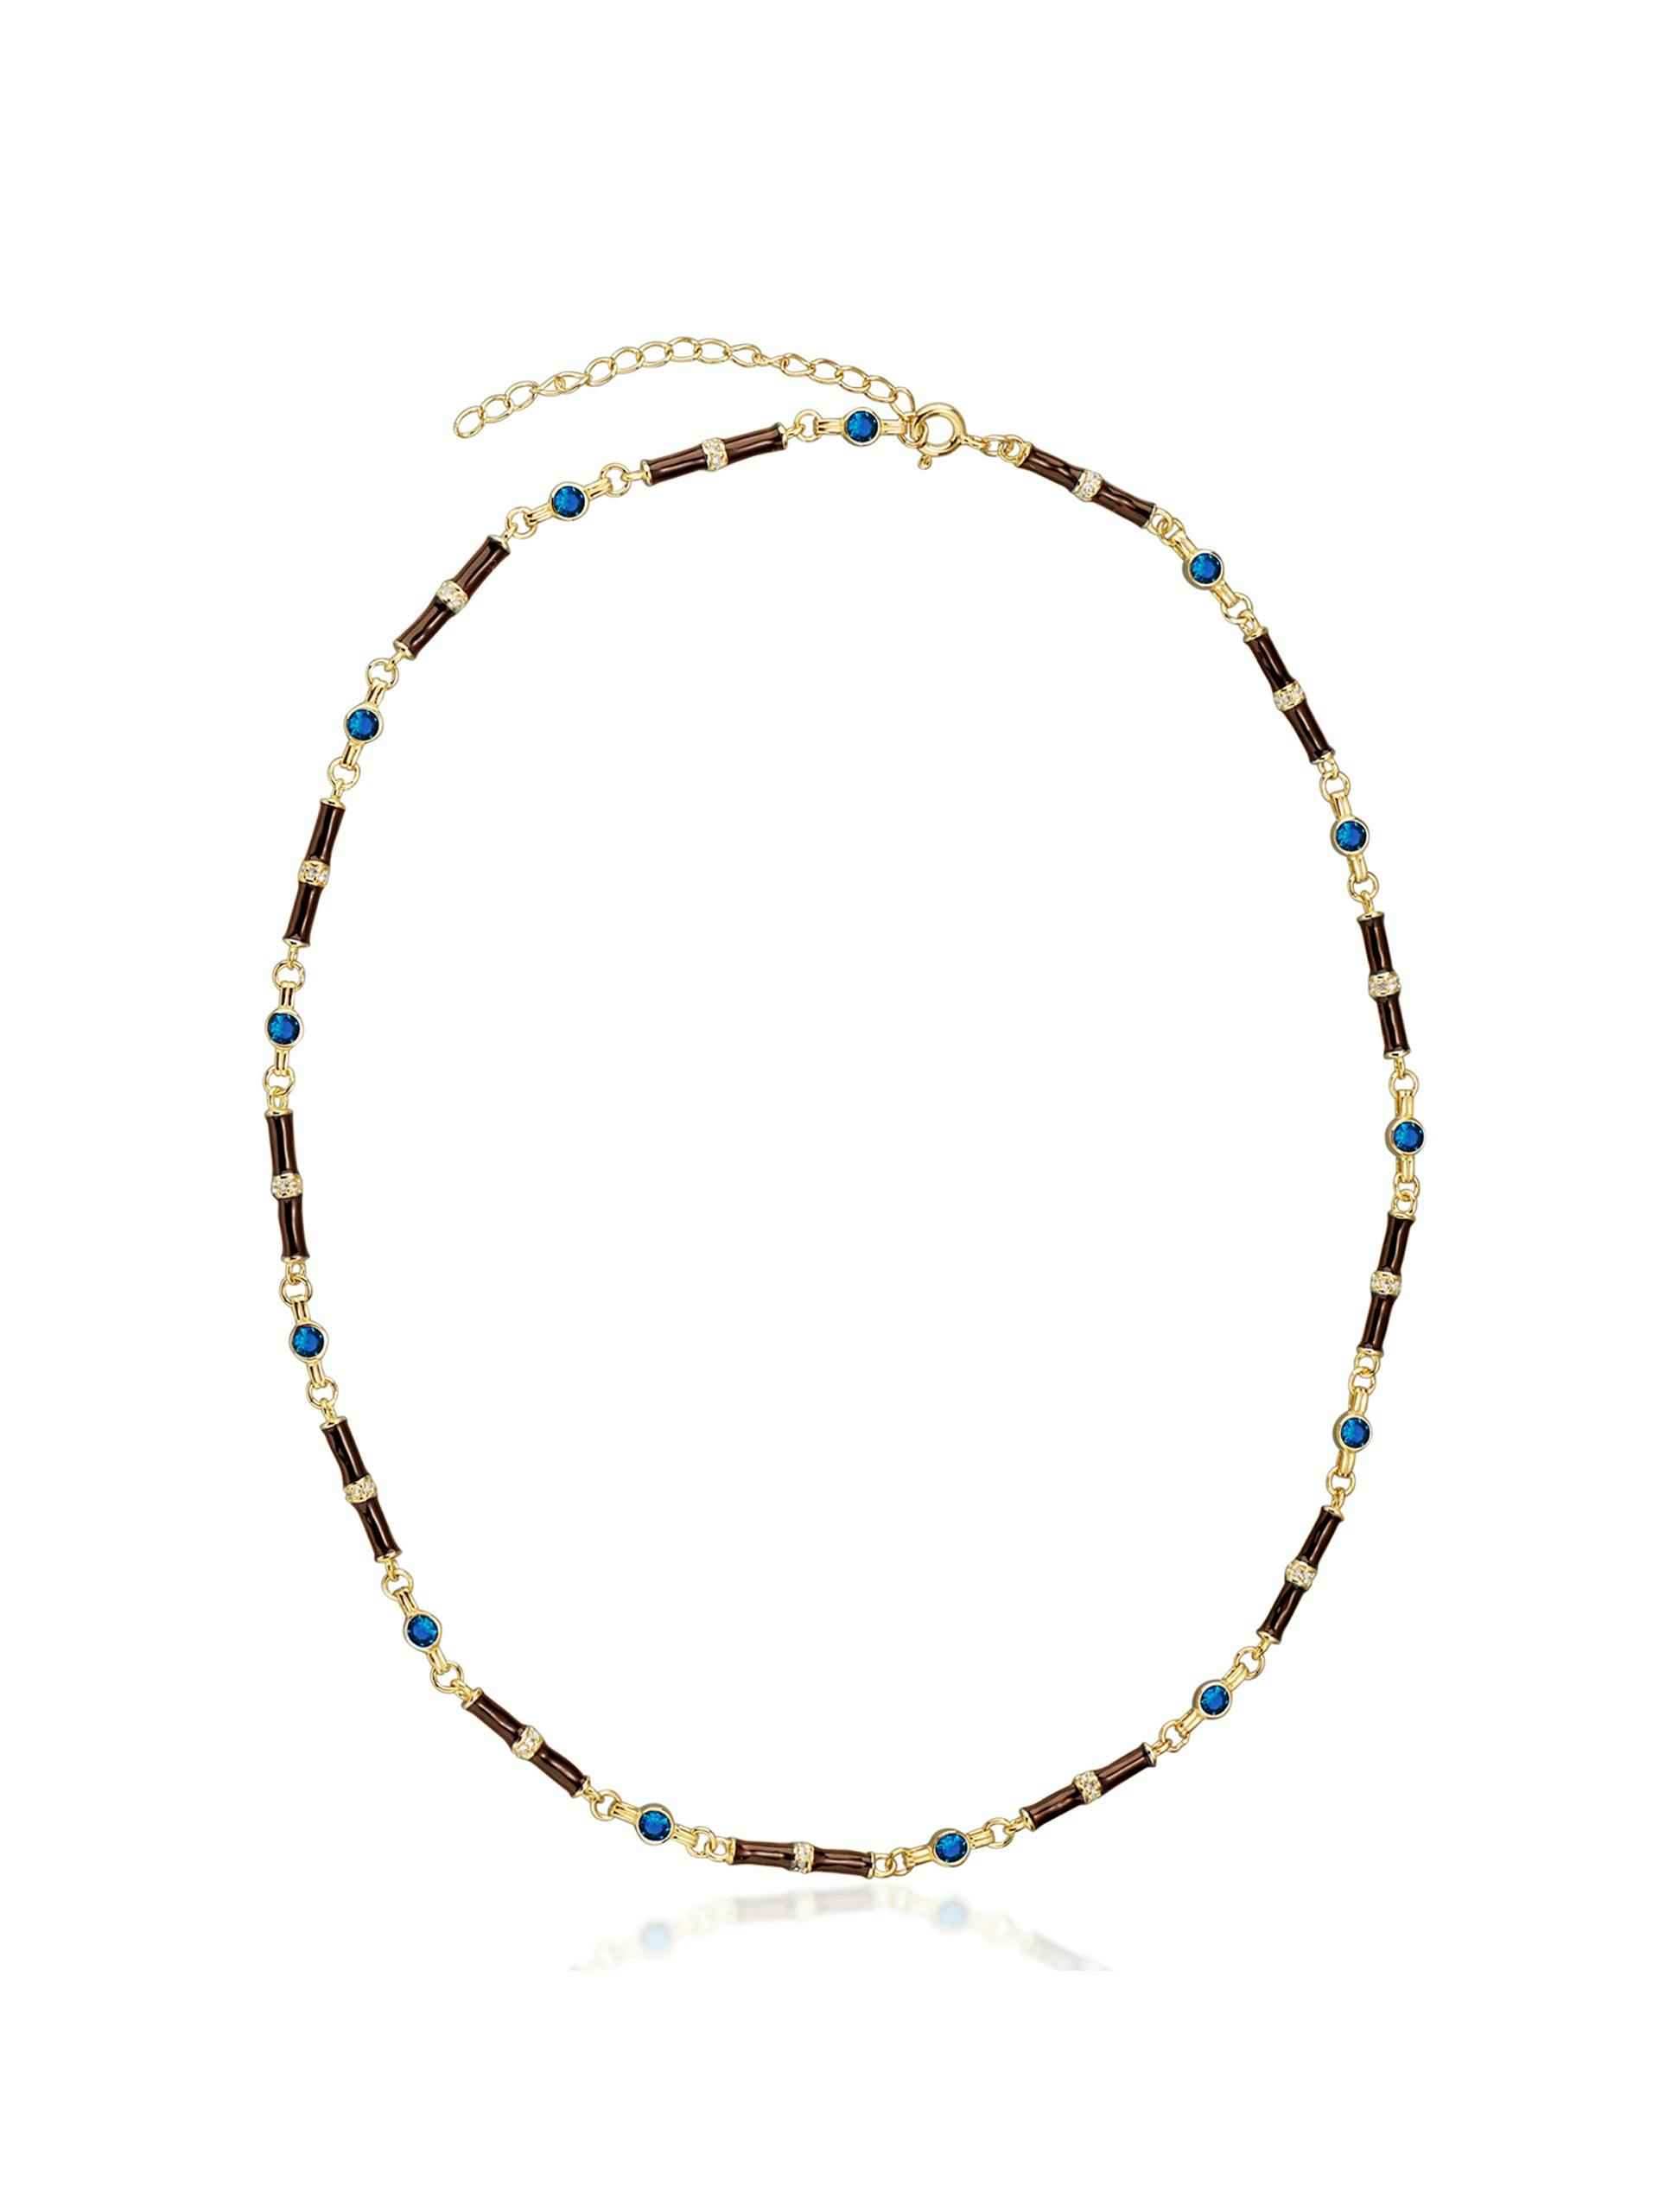 Marlowe brown enamel necklace with sapphire blue stone